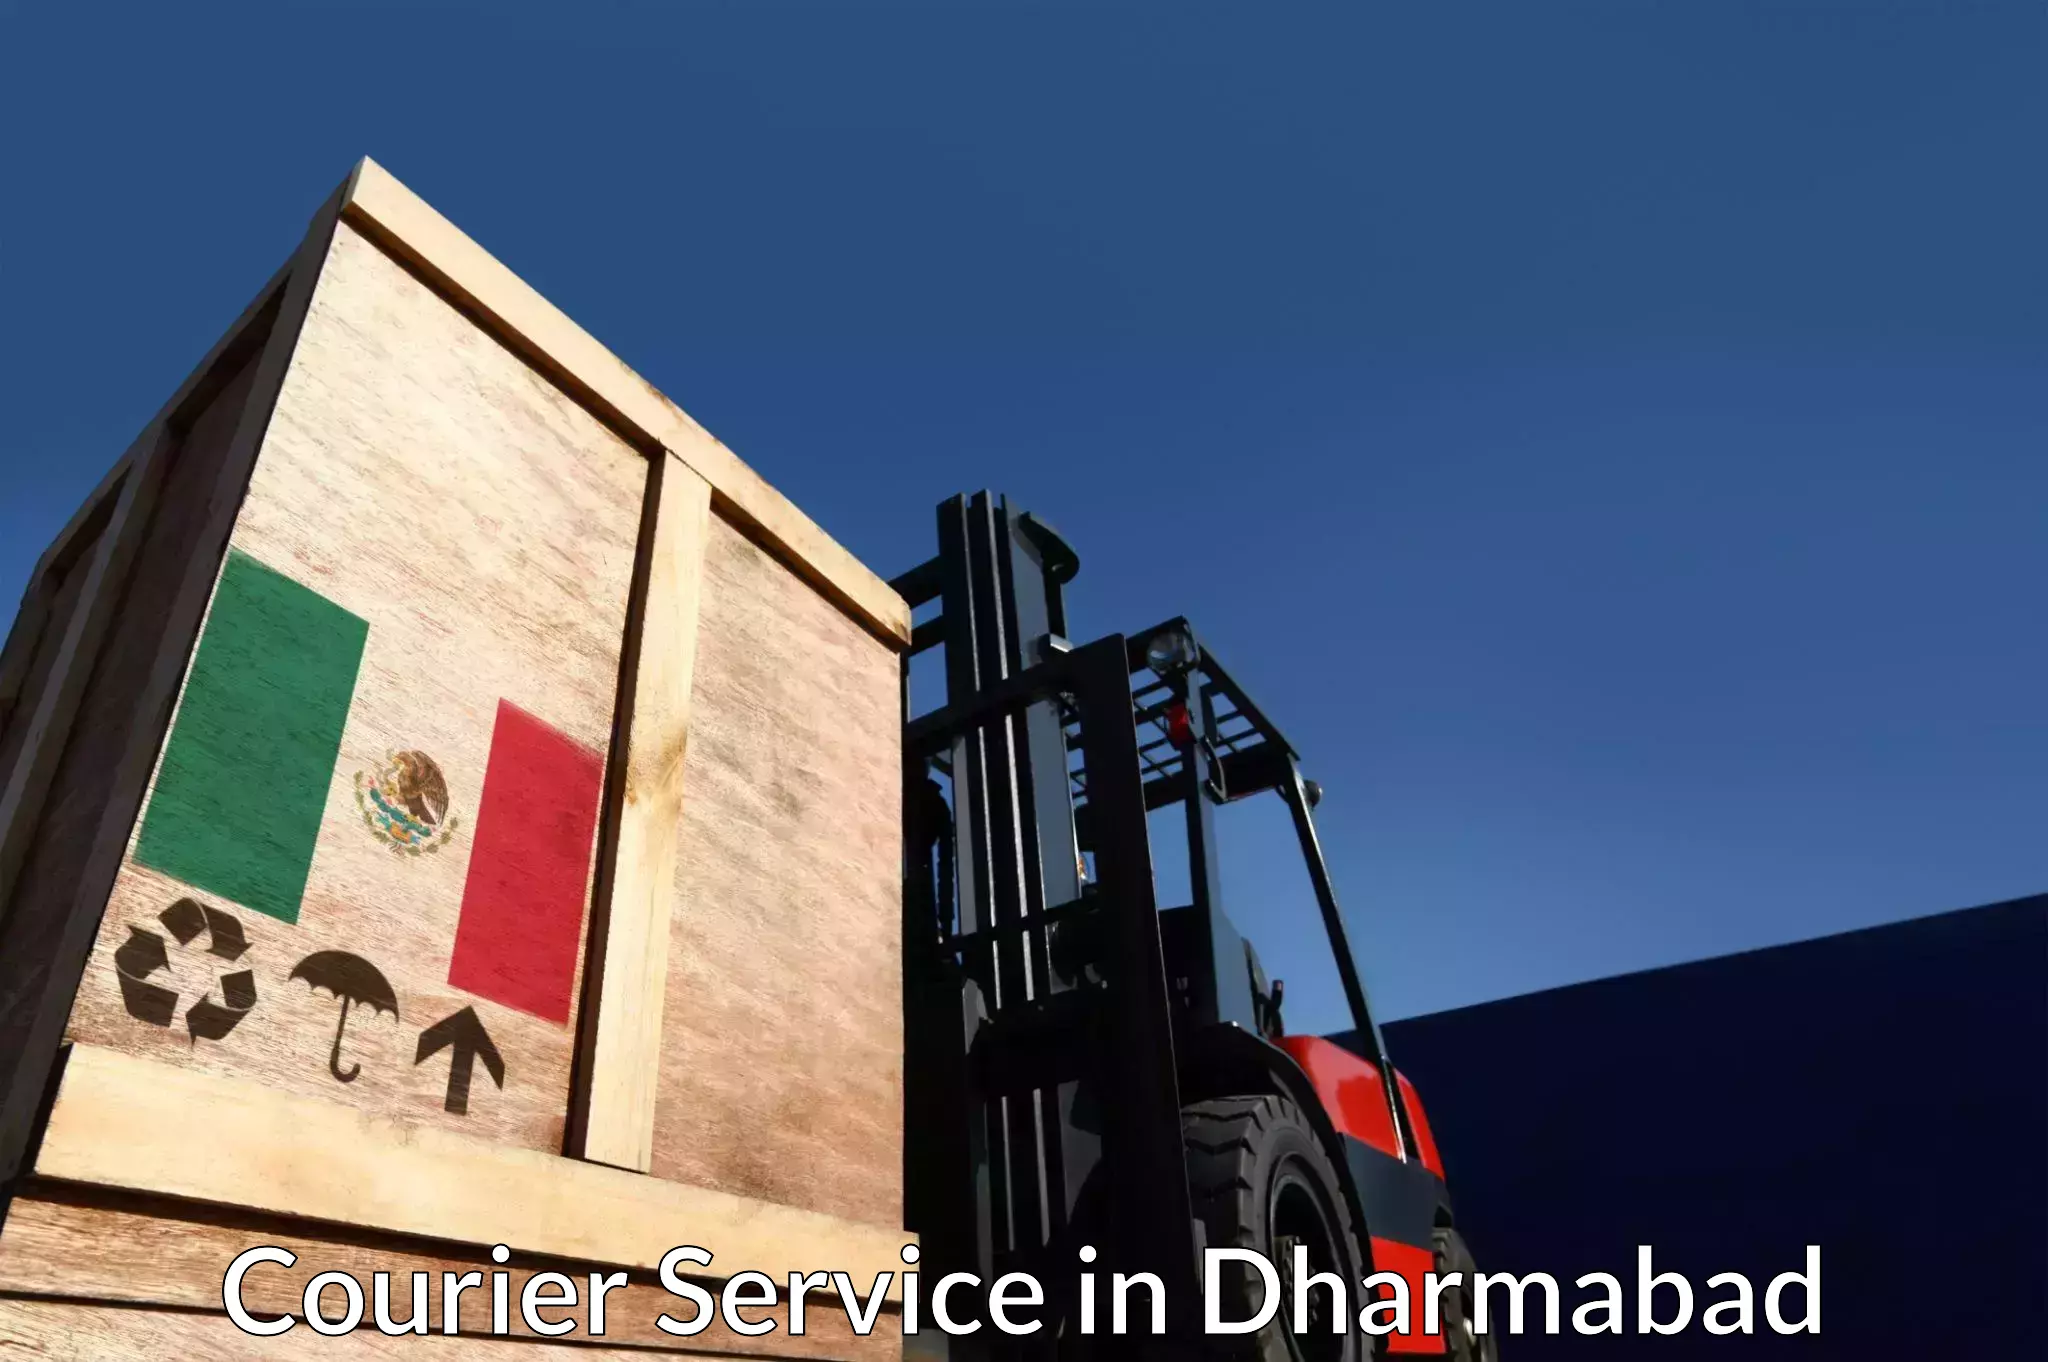 Flexible courier rates in Dharmabad